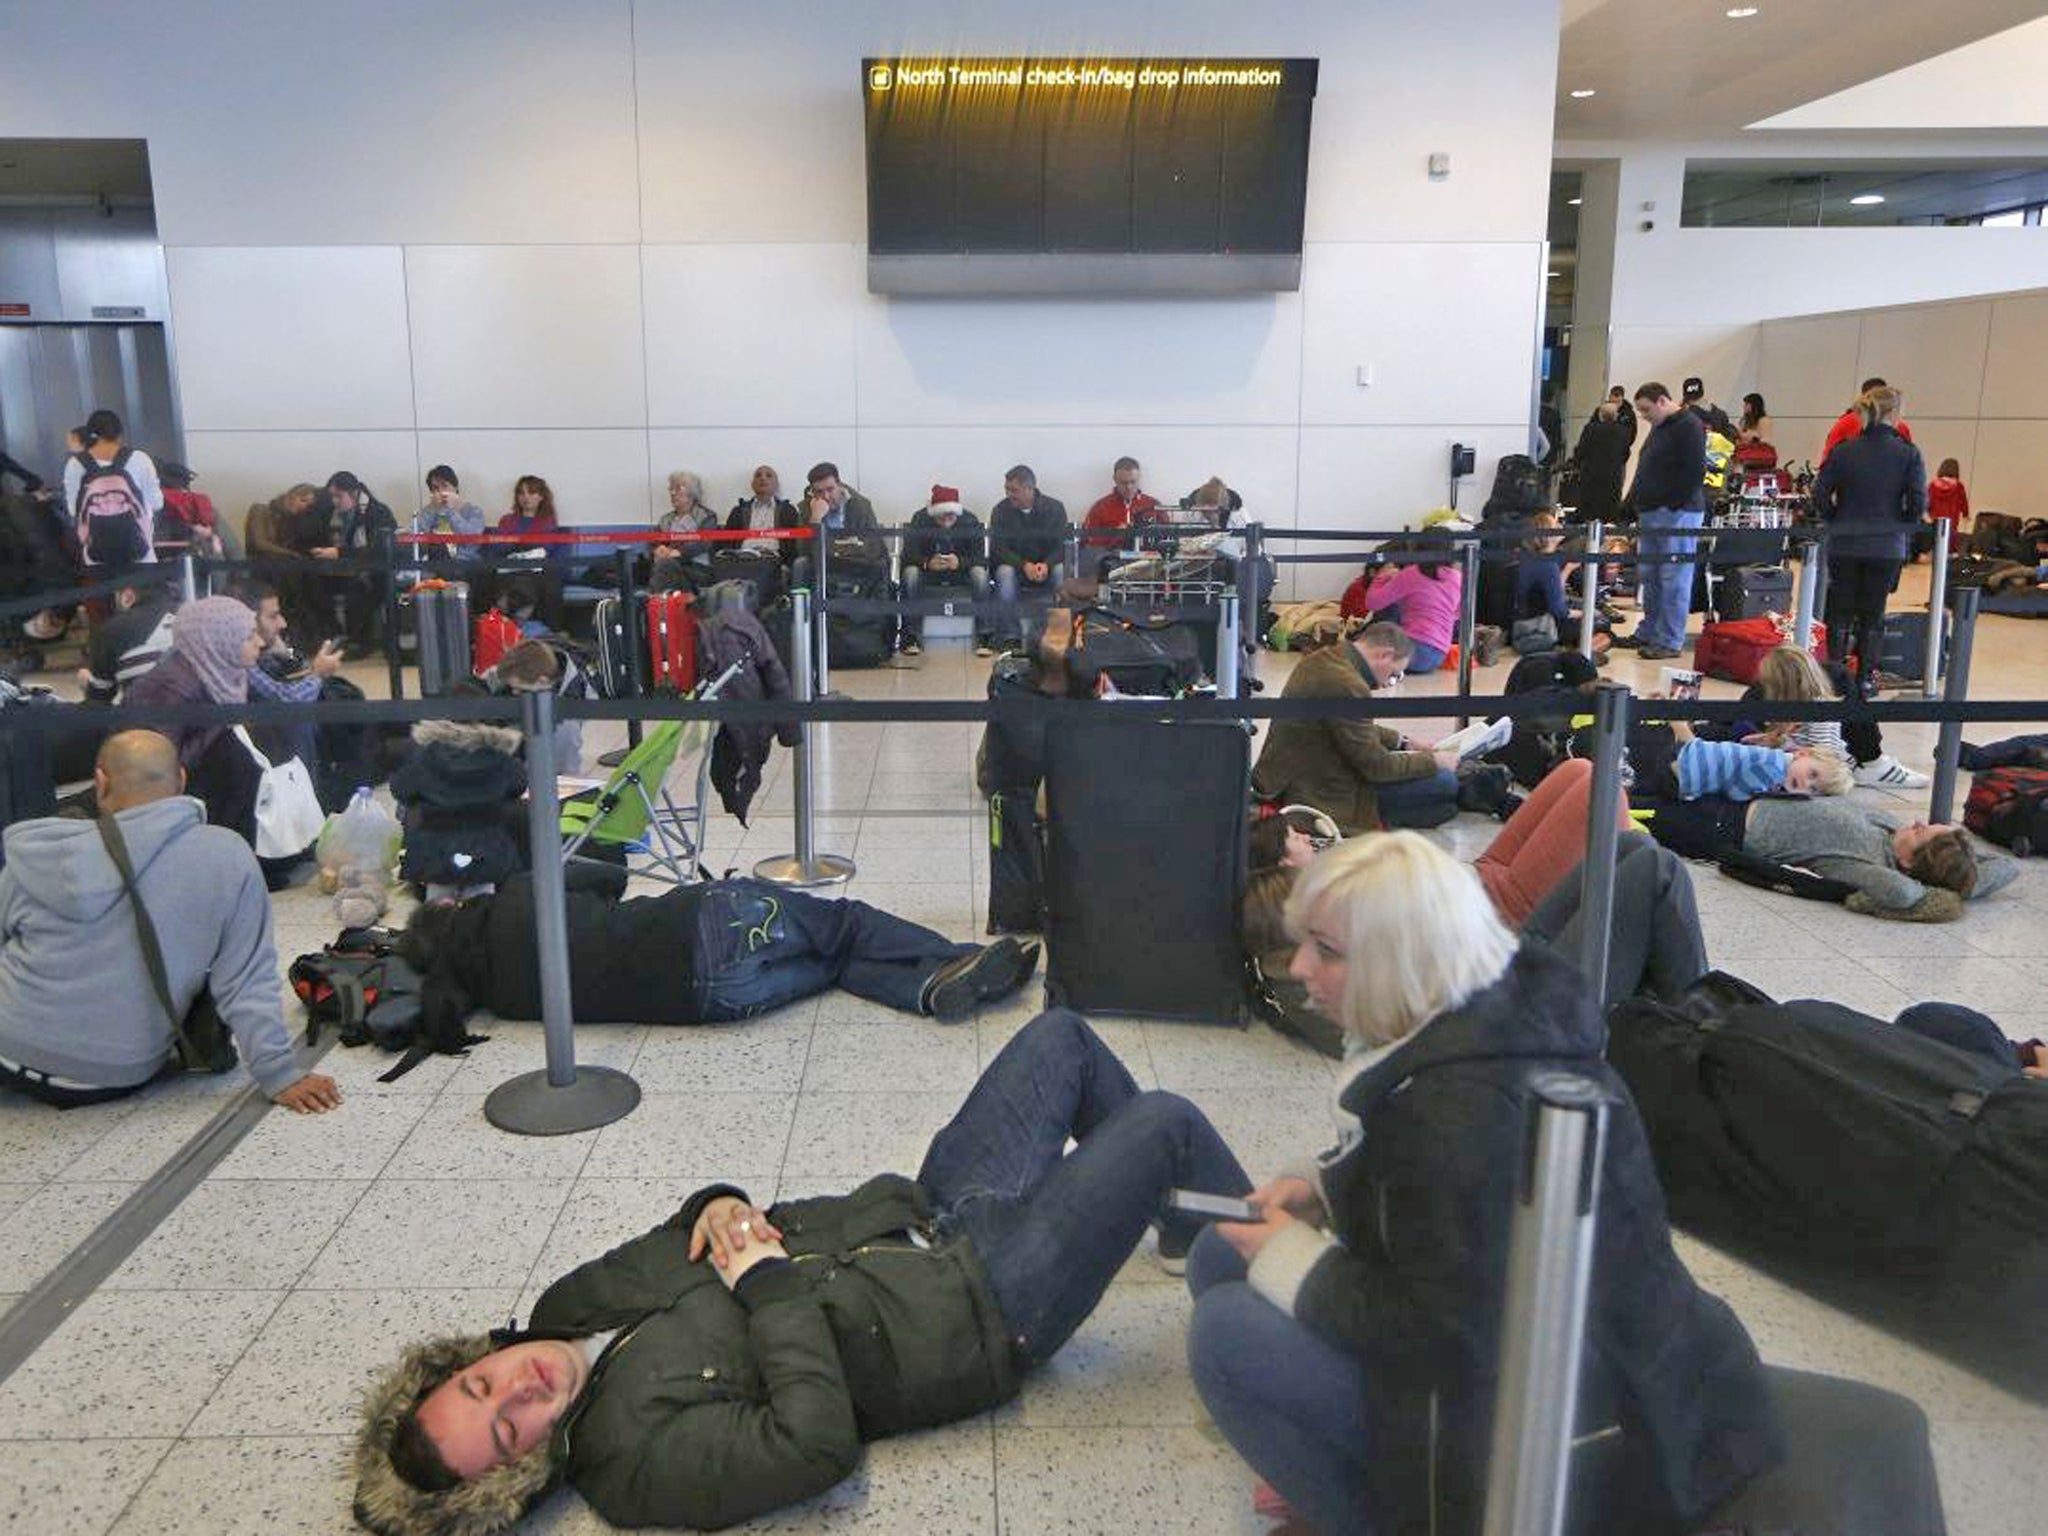 Thousands of passengers were stuck at Gatwick airport due to the disruption